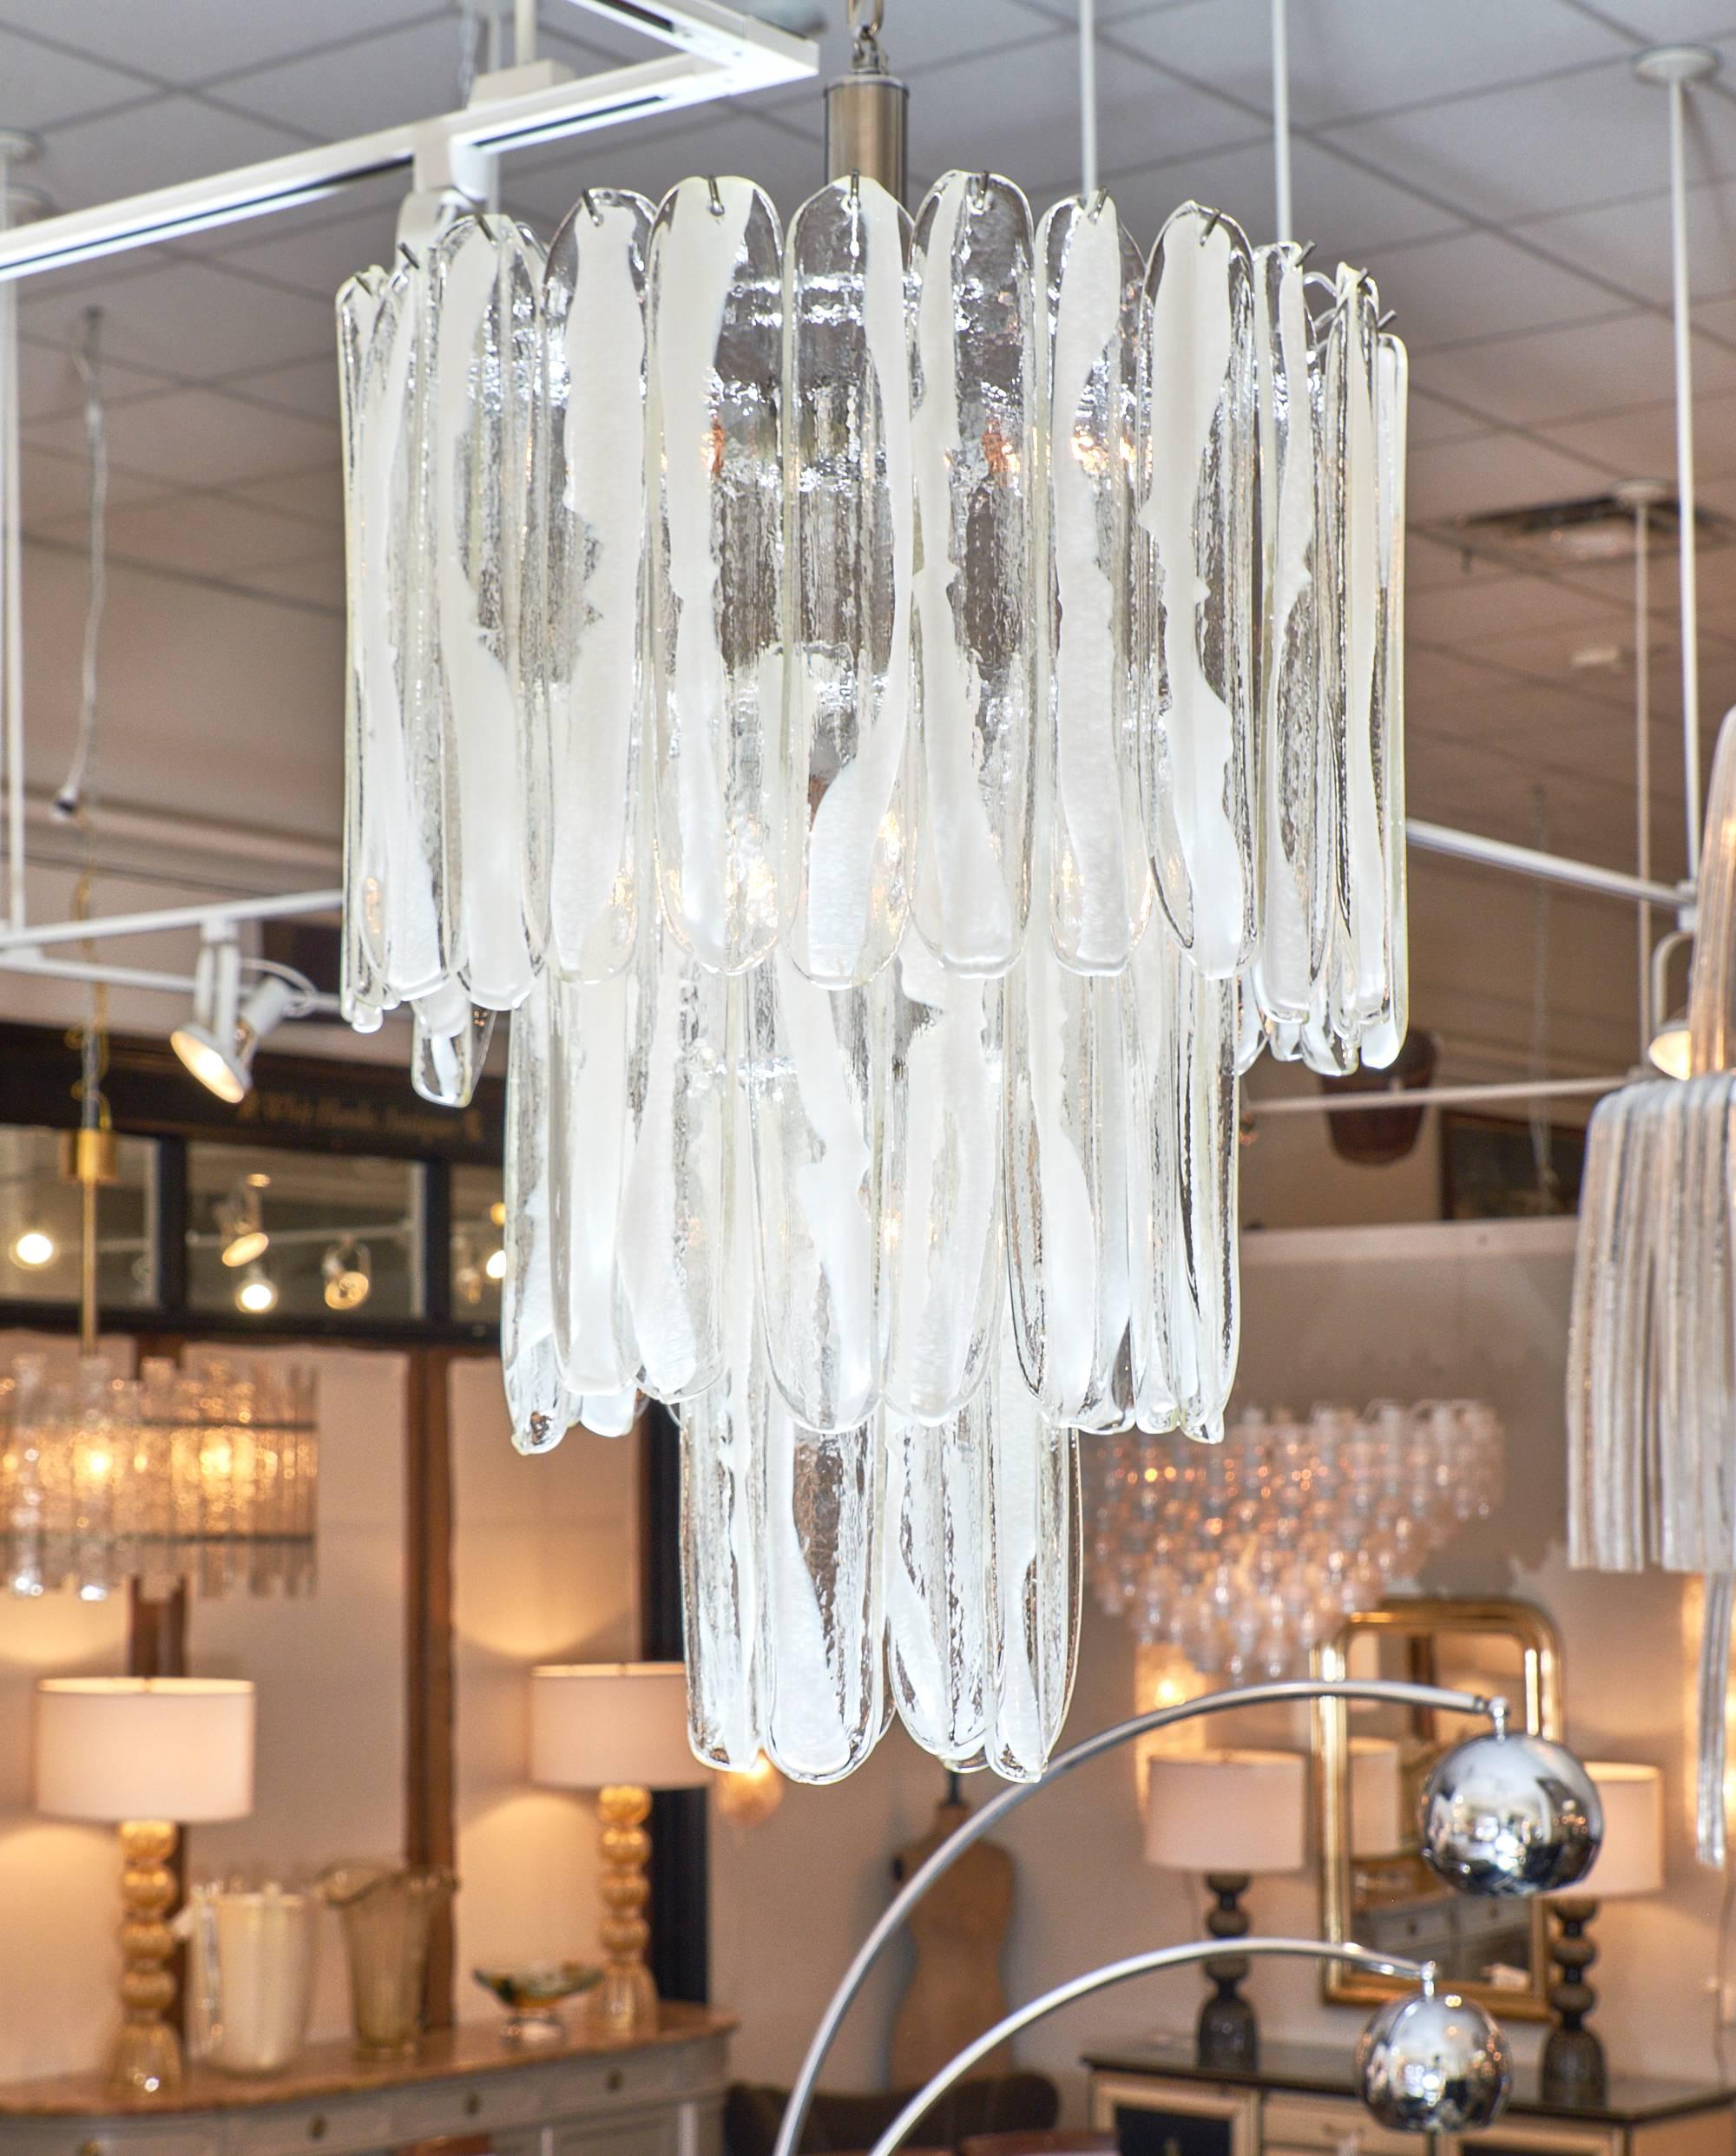 Beautiful pieces of Murano glass in a rippled shape hang to create this stunning tiered chandelier. In the Incamicciato technique each piece is a clear transparent color with ribbons of white opaline. The fixture has three tiers, each with a smaller